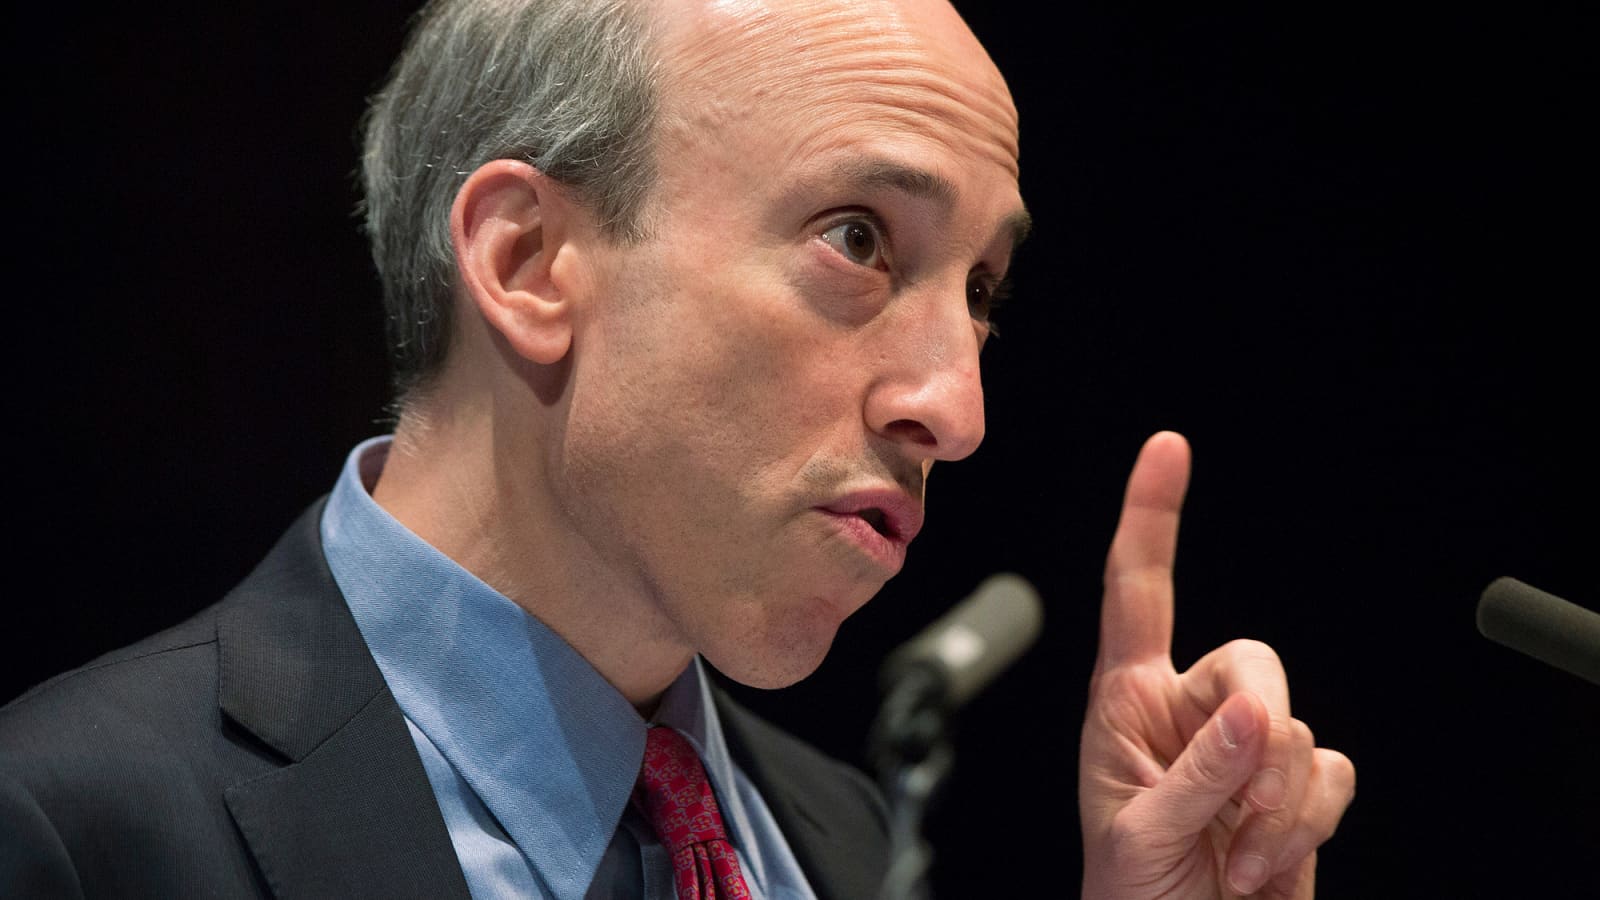 SEC Chair Gary Gensler concerned about Robinhood, trading gamification,  social media hype